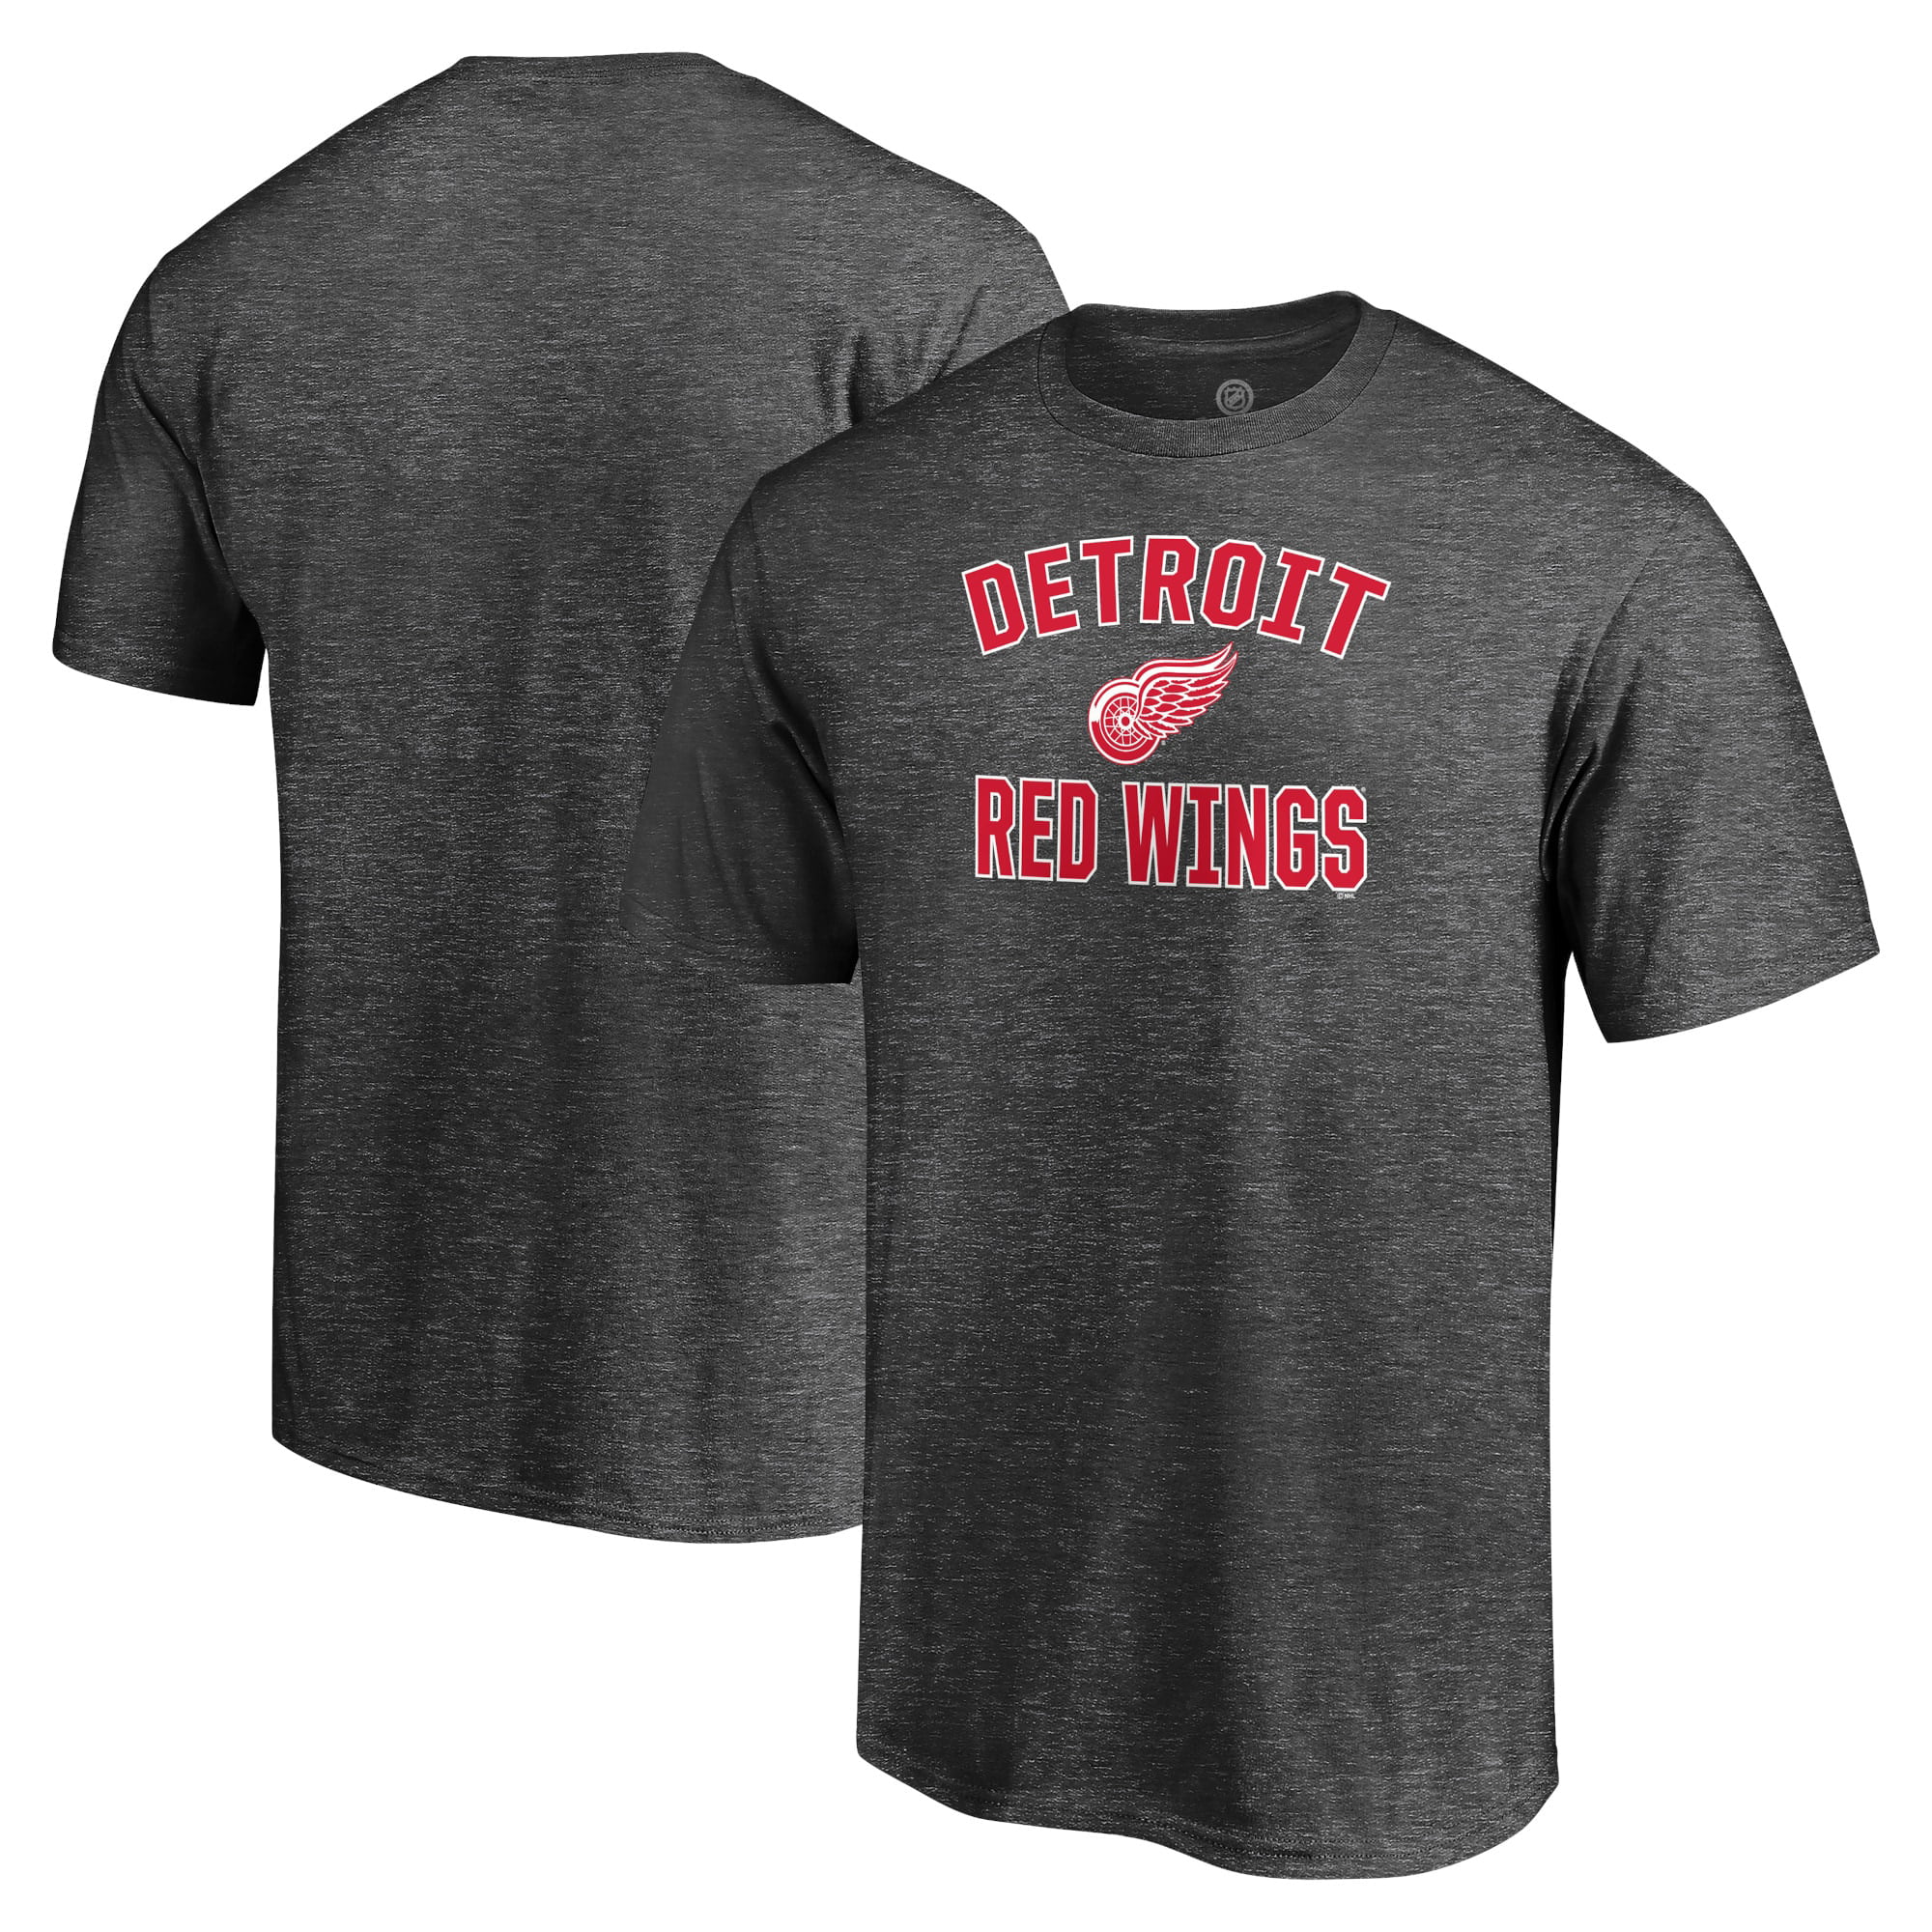 Men's Fanatics Branded Charcoal Detroit Red Wings Victory Arch Team T-Shirt